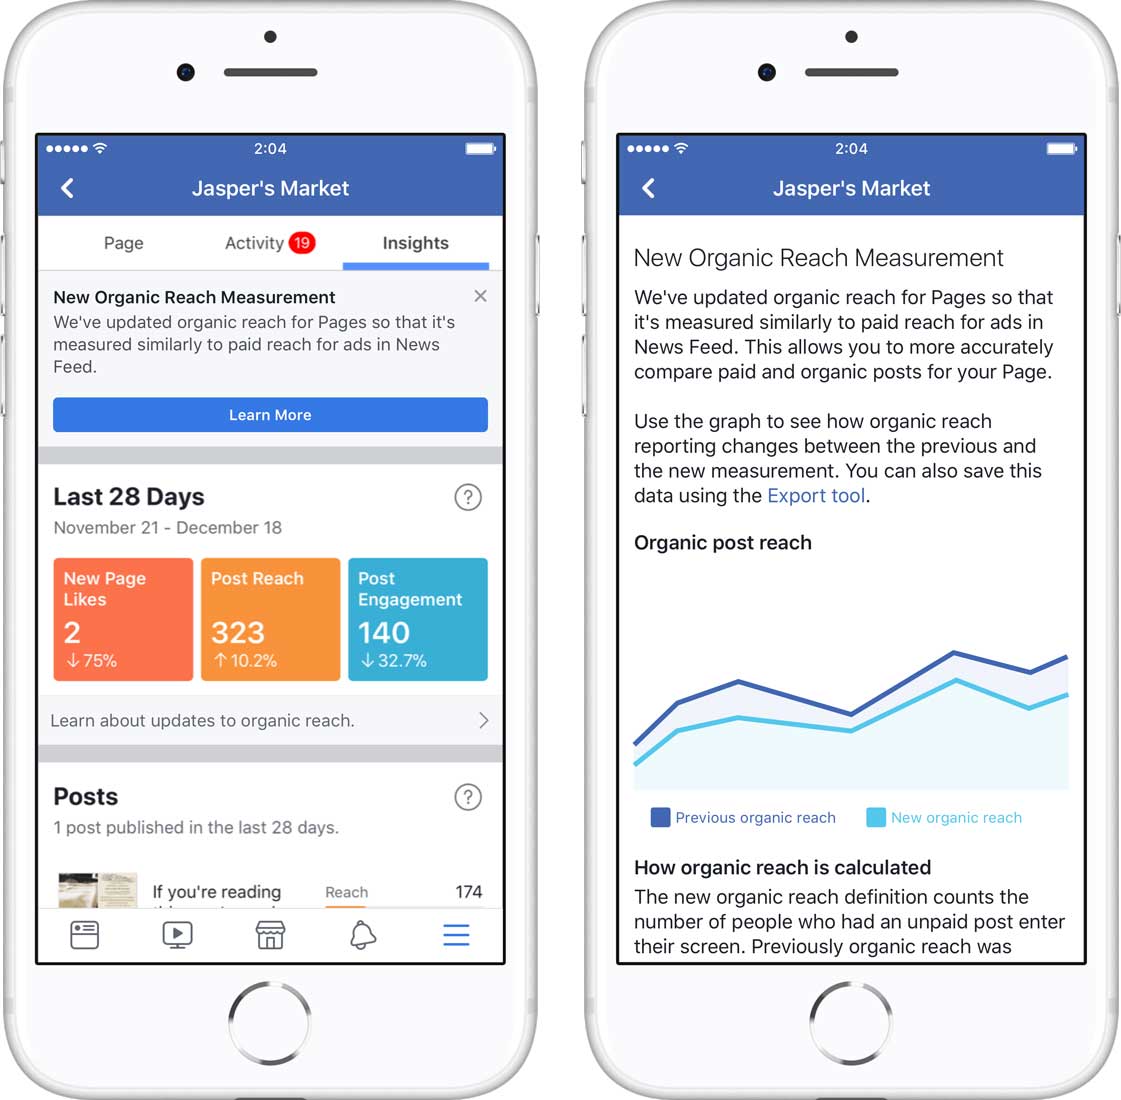 Facebook to Begin Measuring Post Reach Based on Actual Views